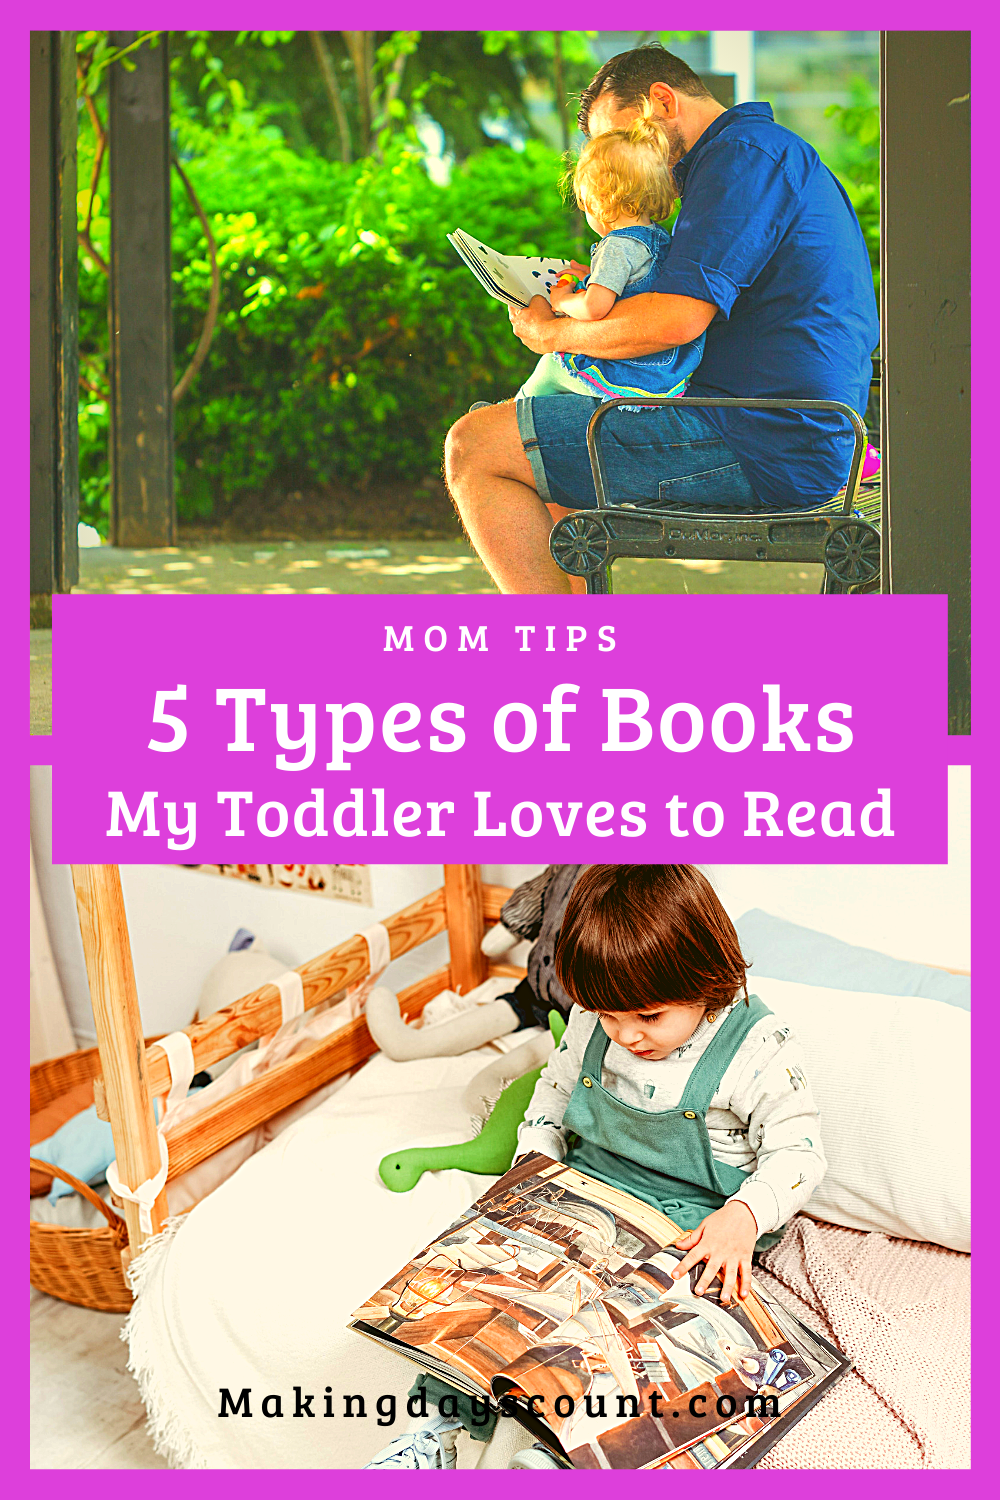 books my 21 months old toddler loves